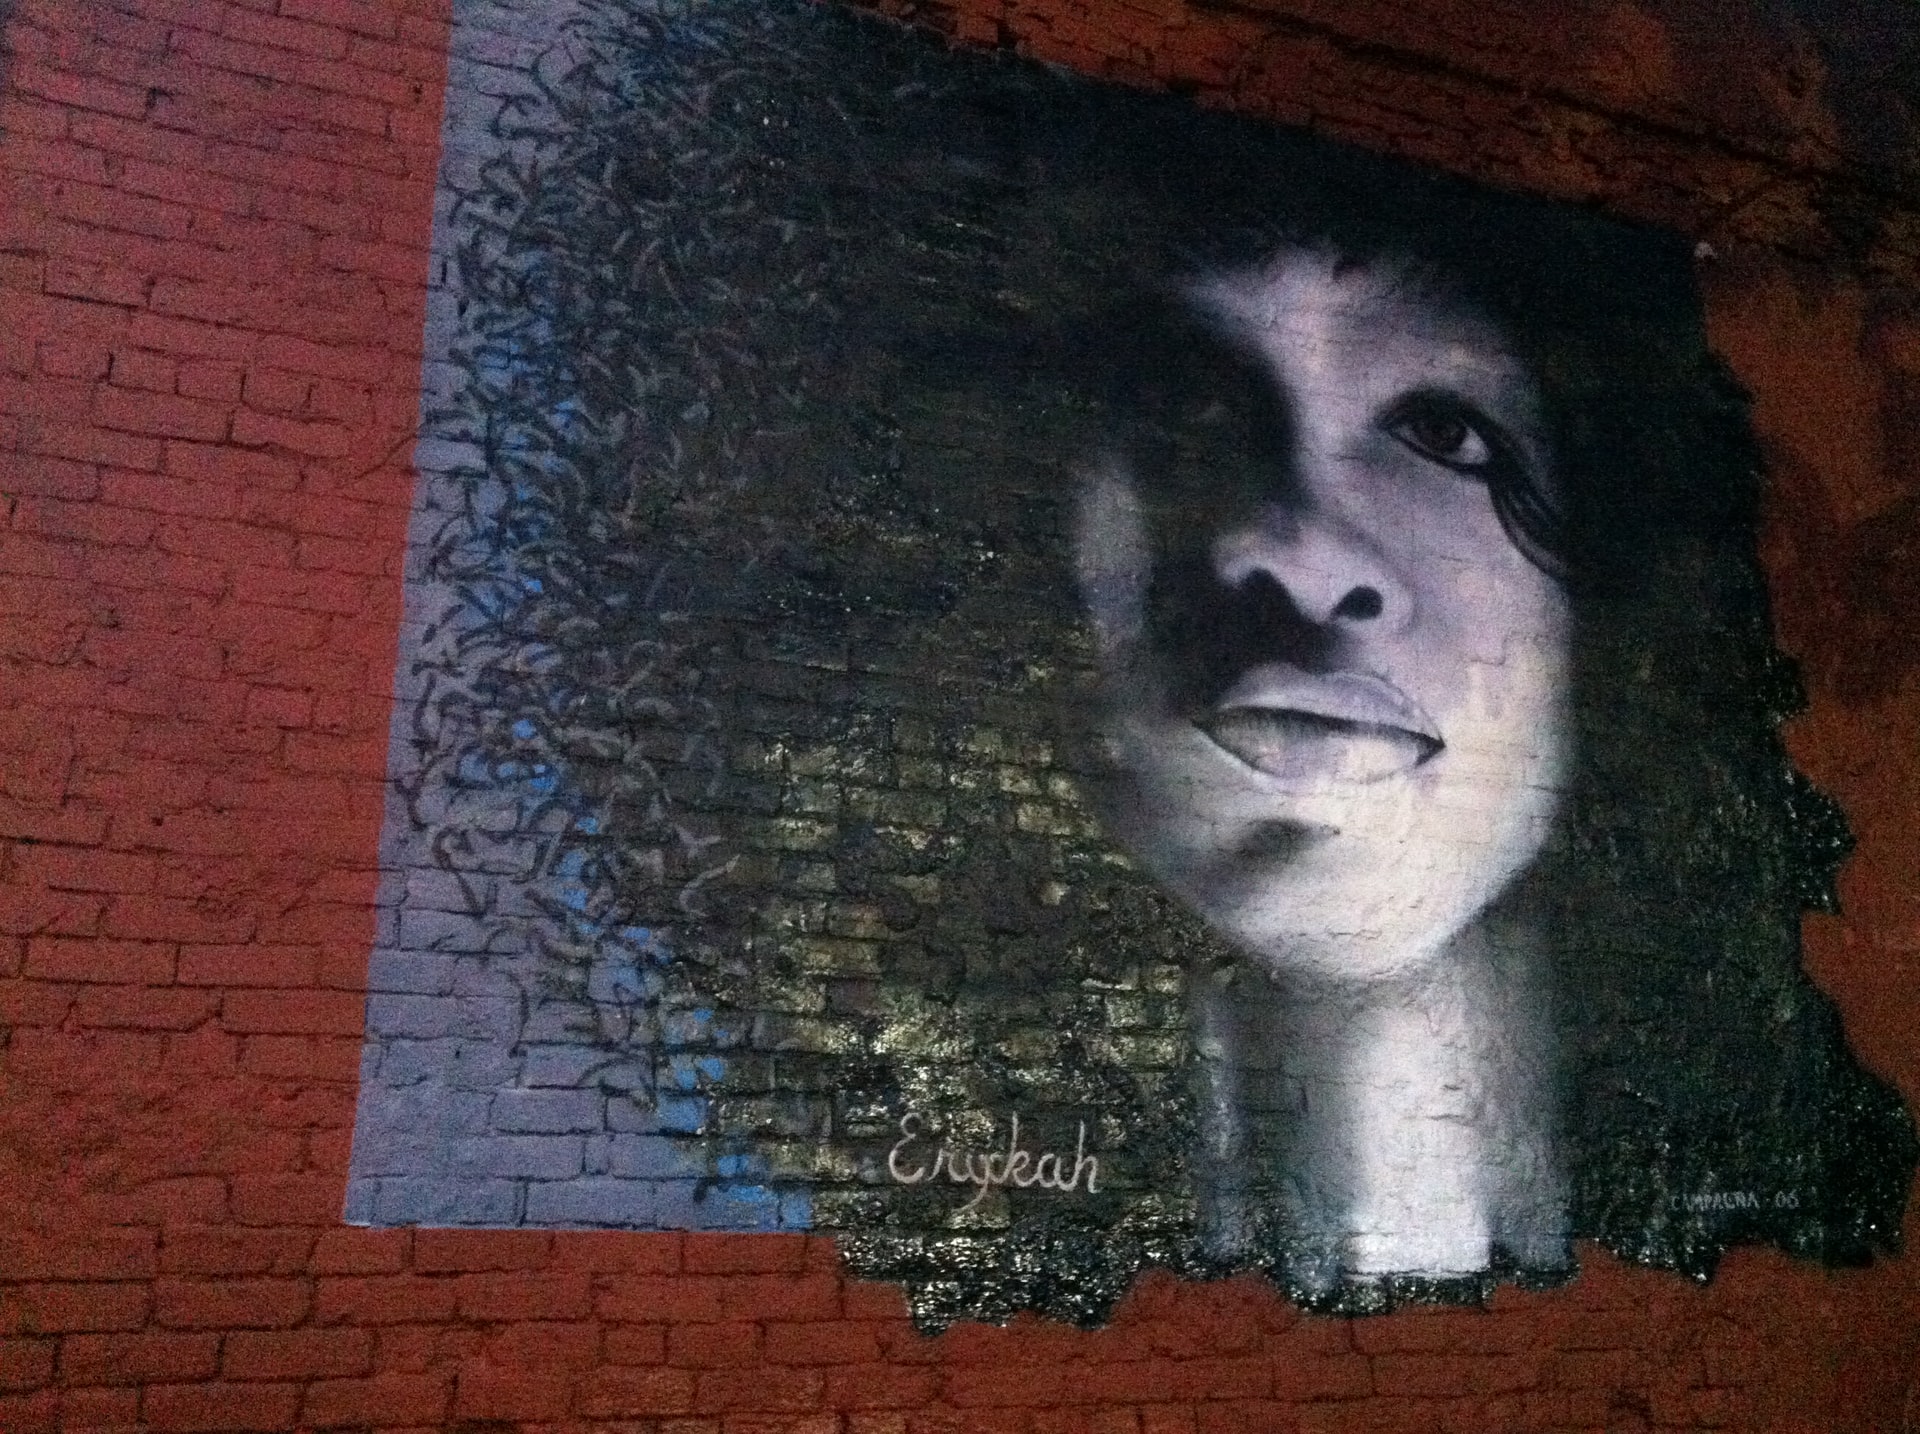 Mural of woman's face painted on a brick wall in Deep Ellum Texas